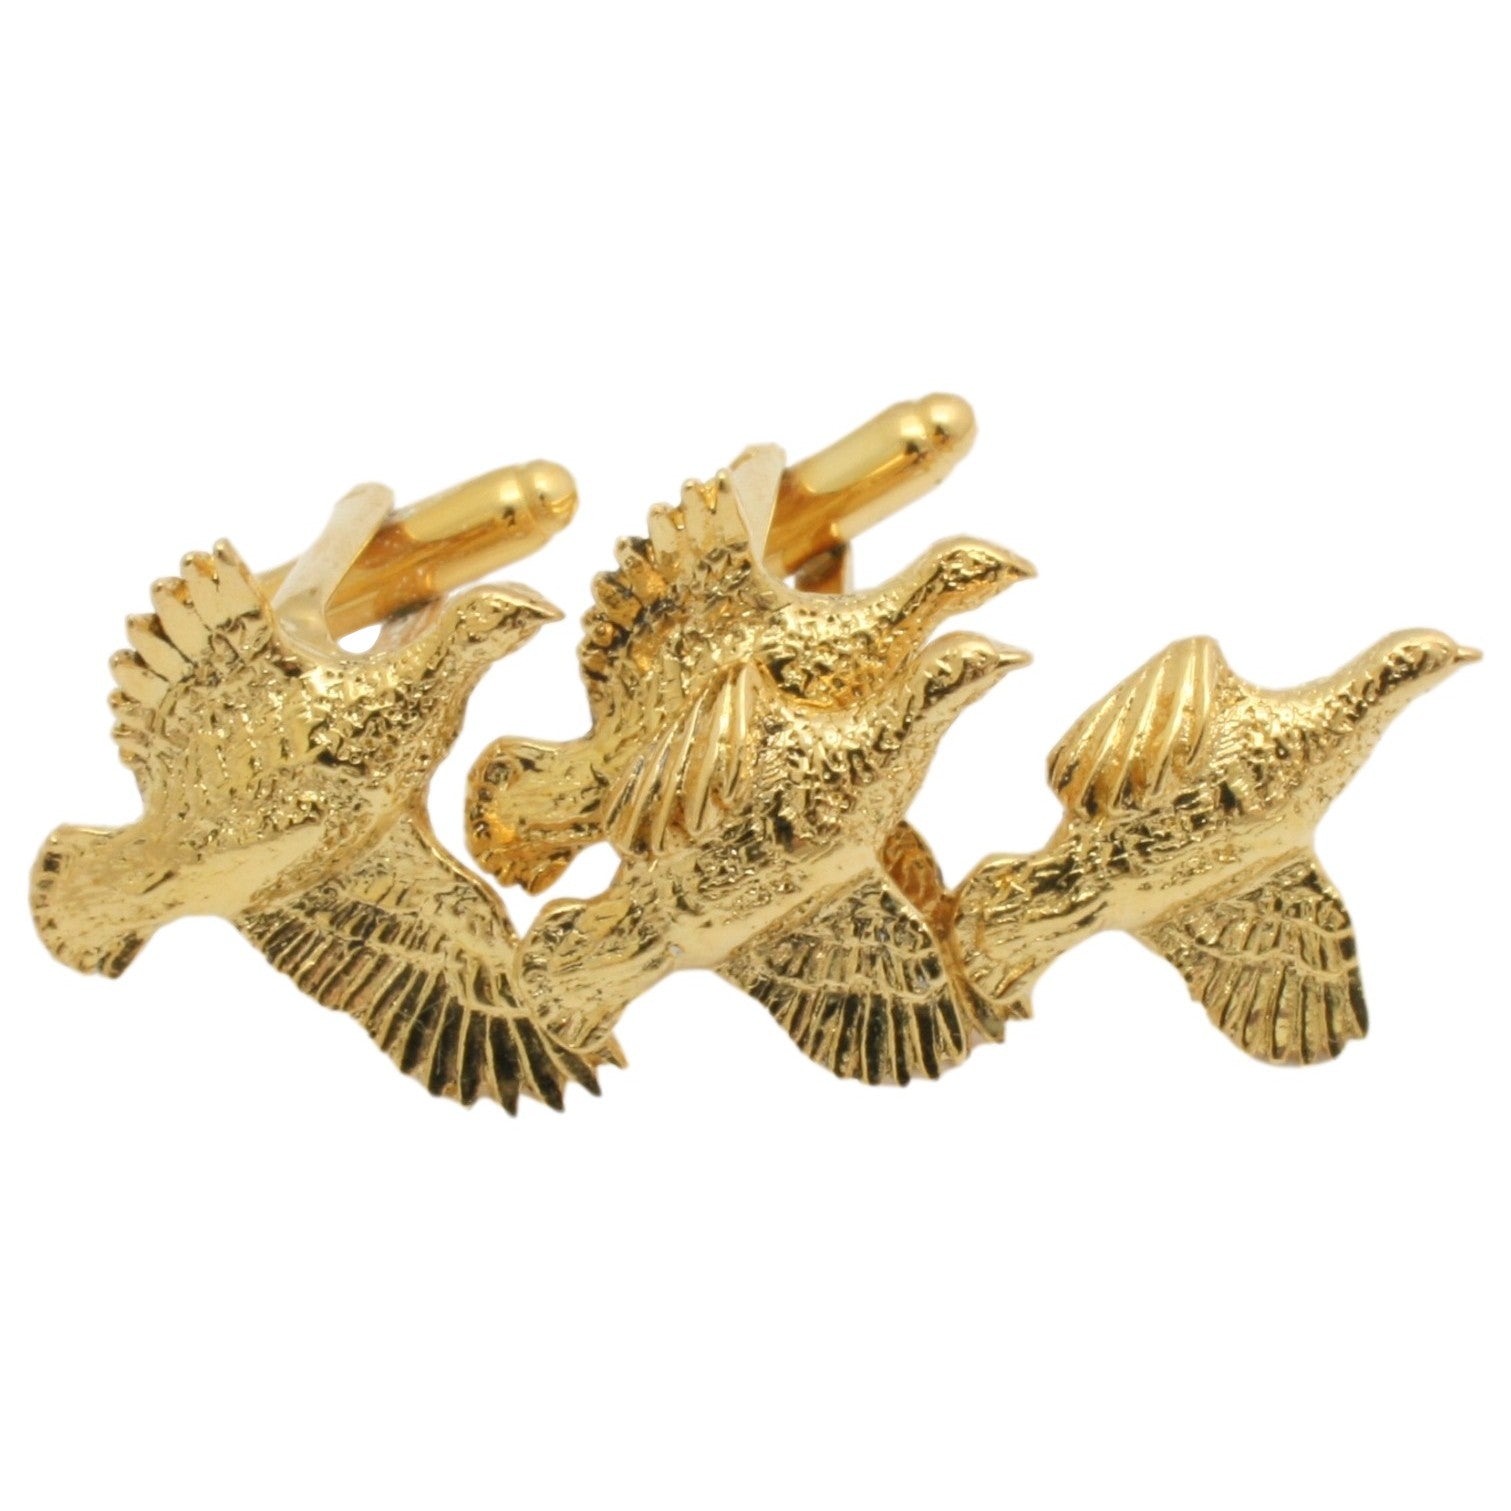 Gold Partridge  Cufflinks From The Front